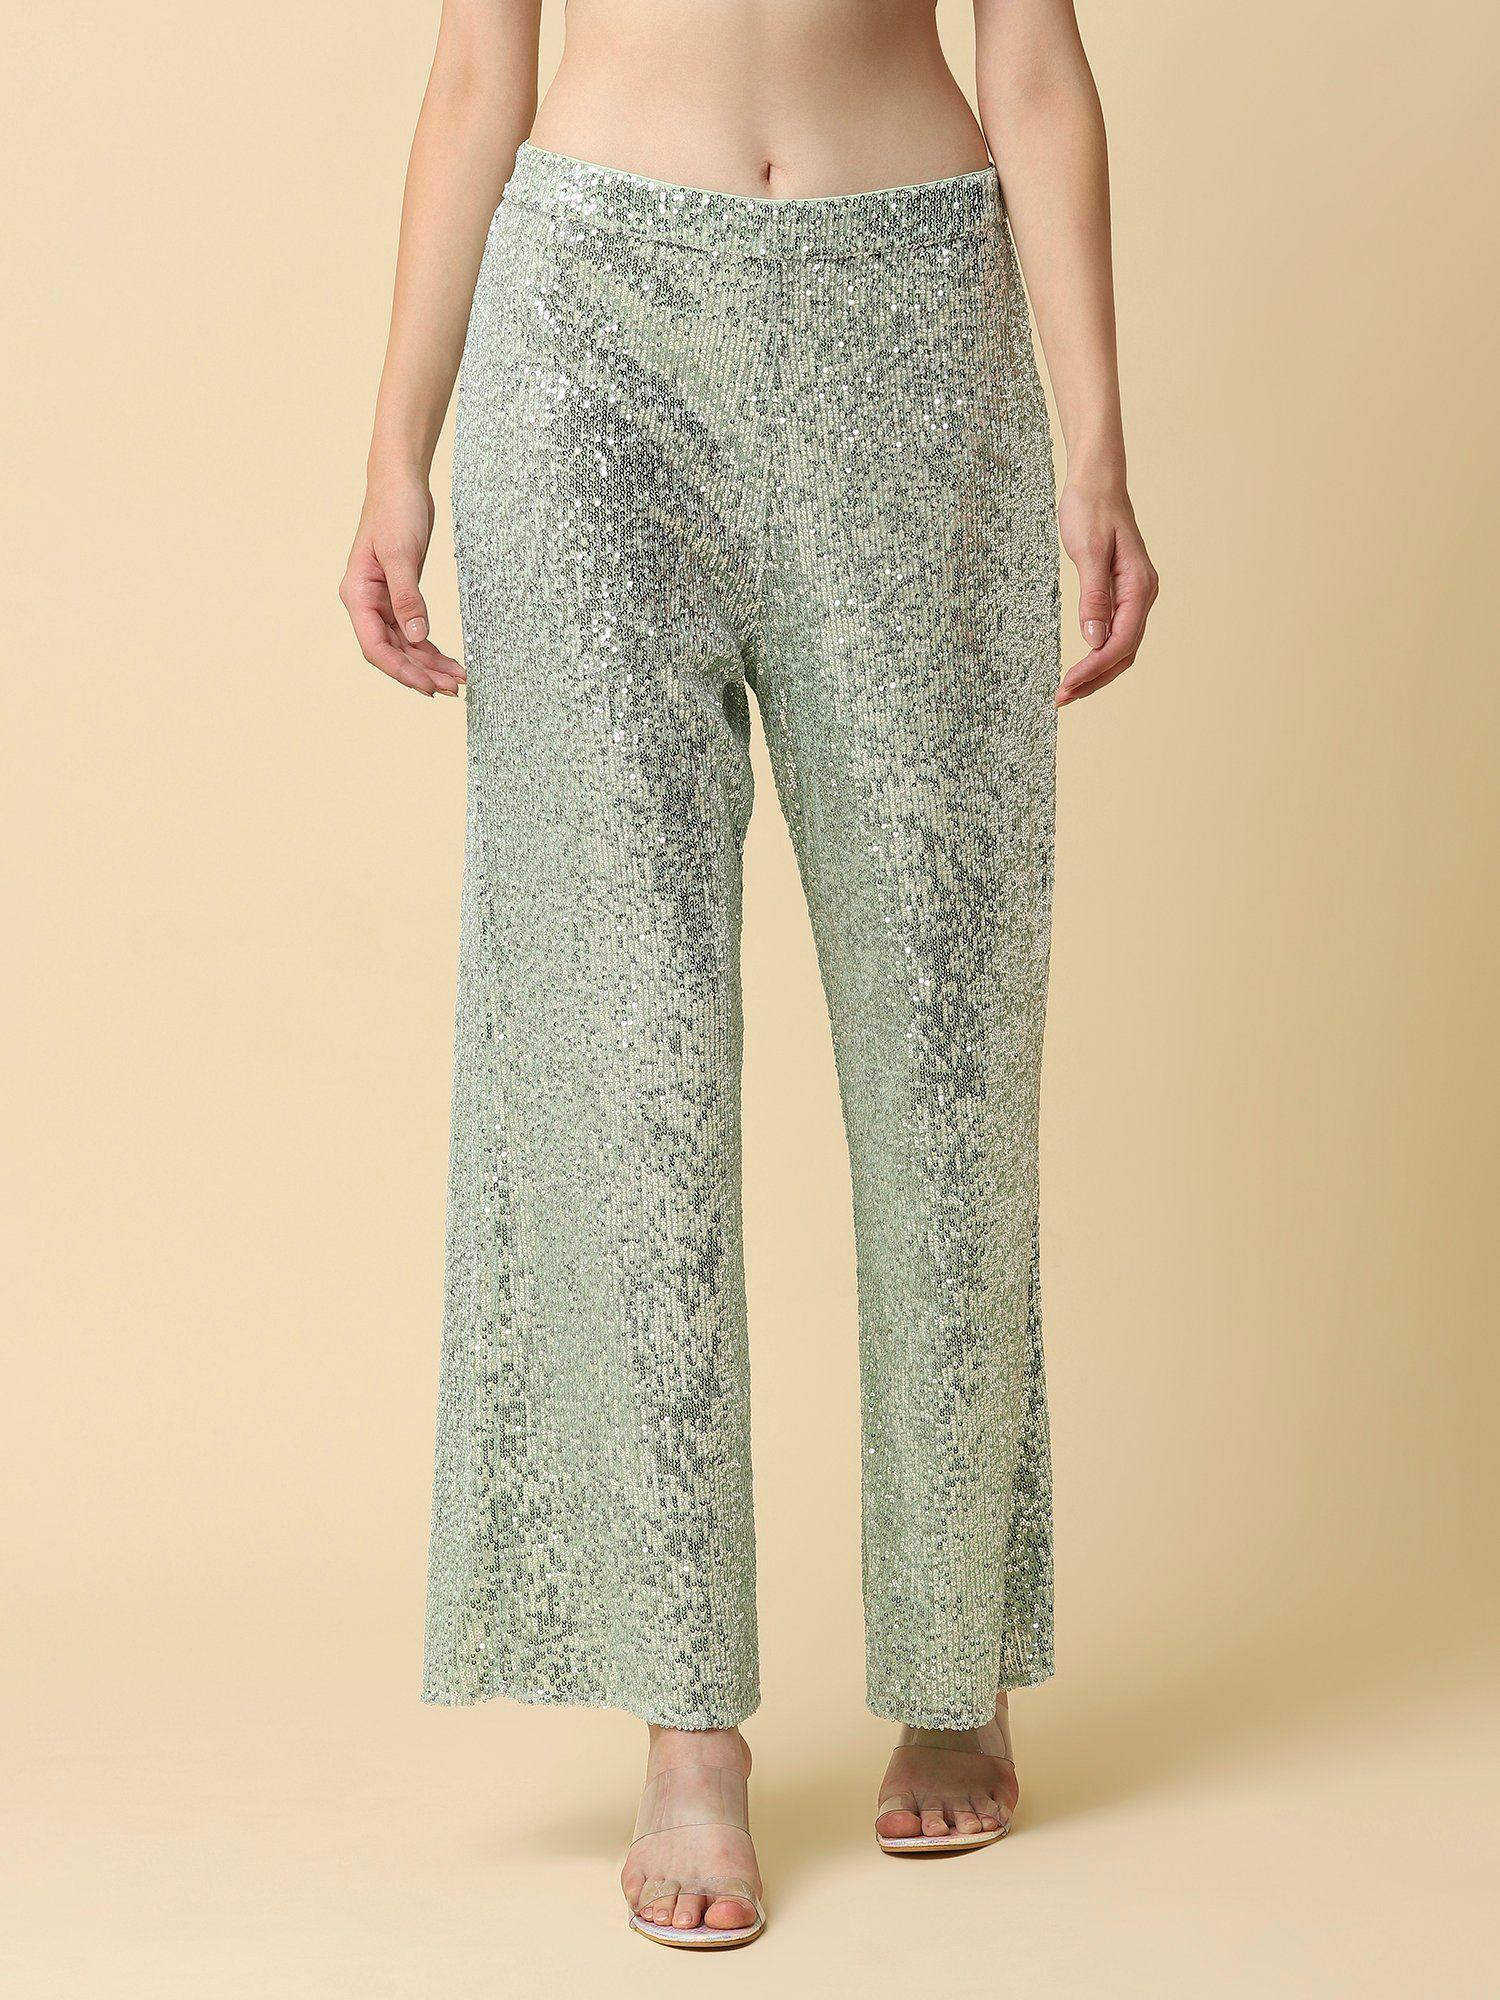 green sequins glittering tulle high rise pants